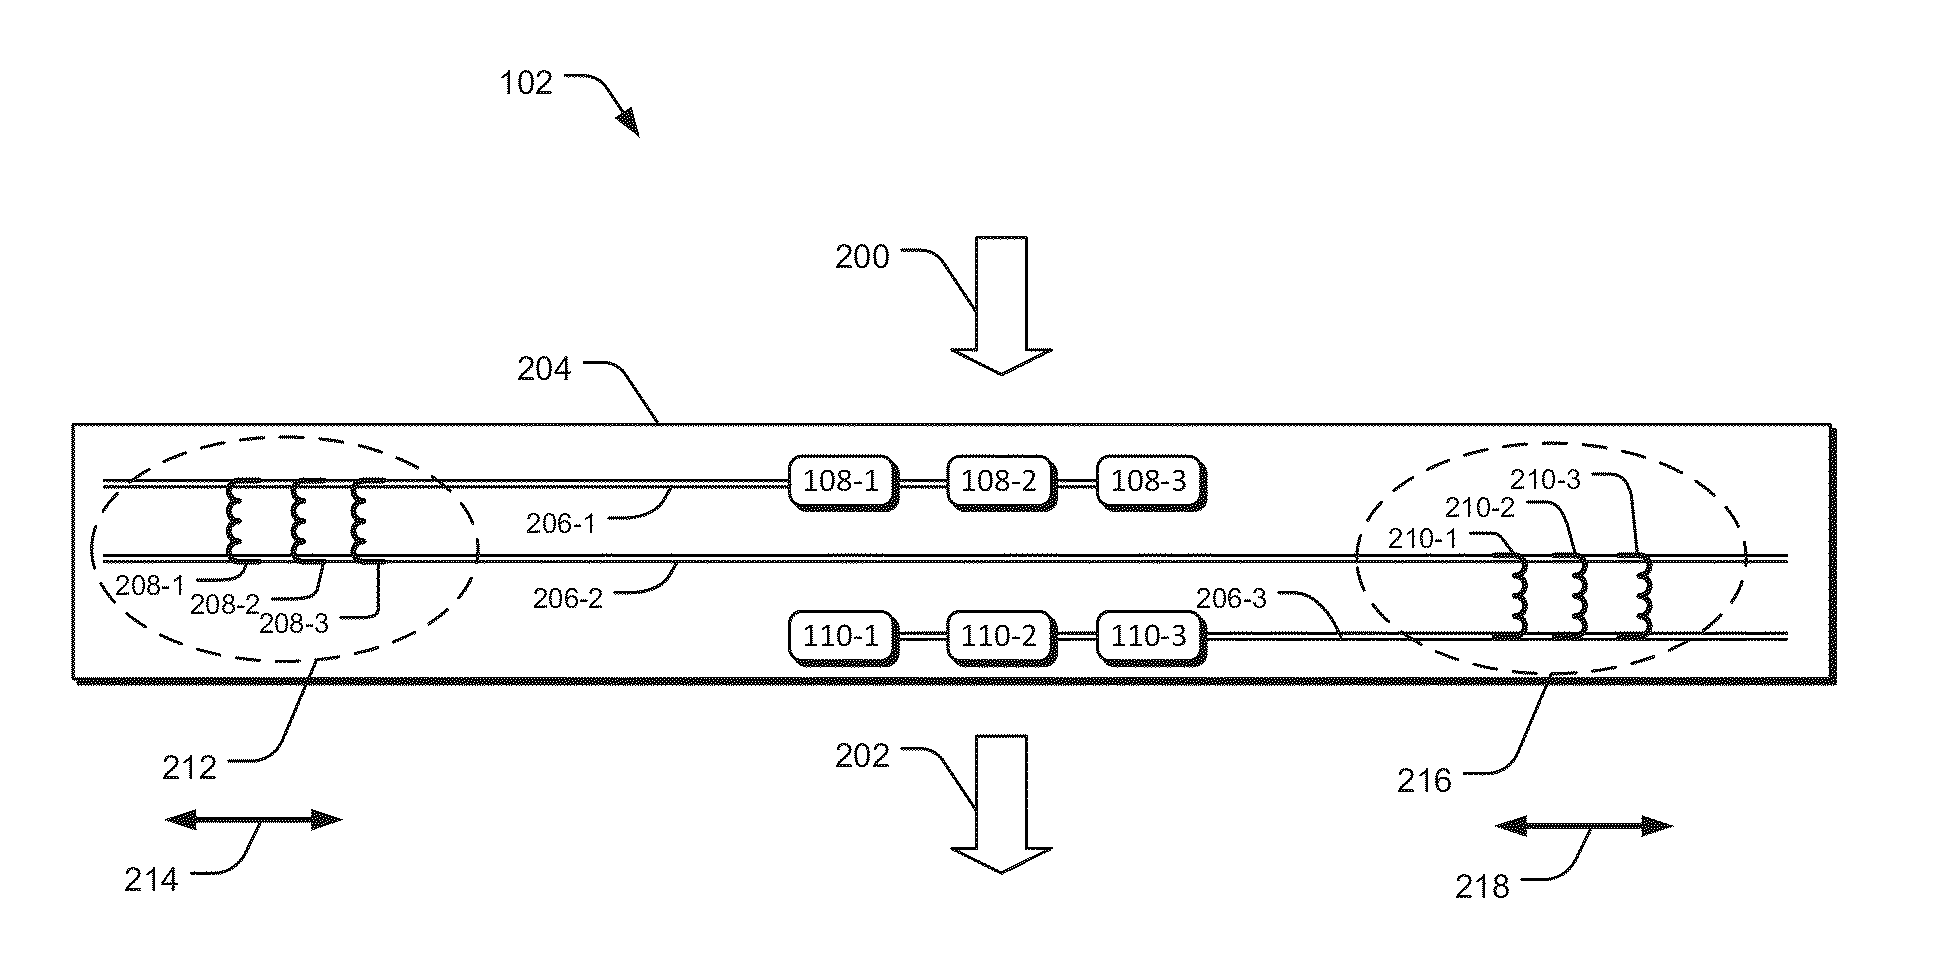 Process tunable resistor with user selectable values